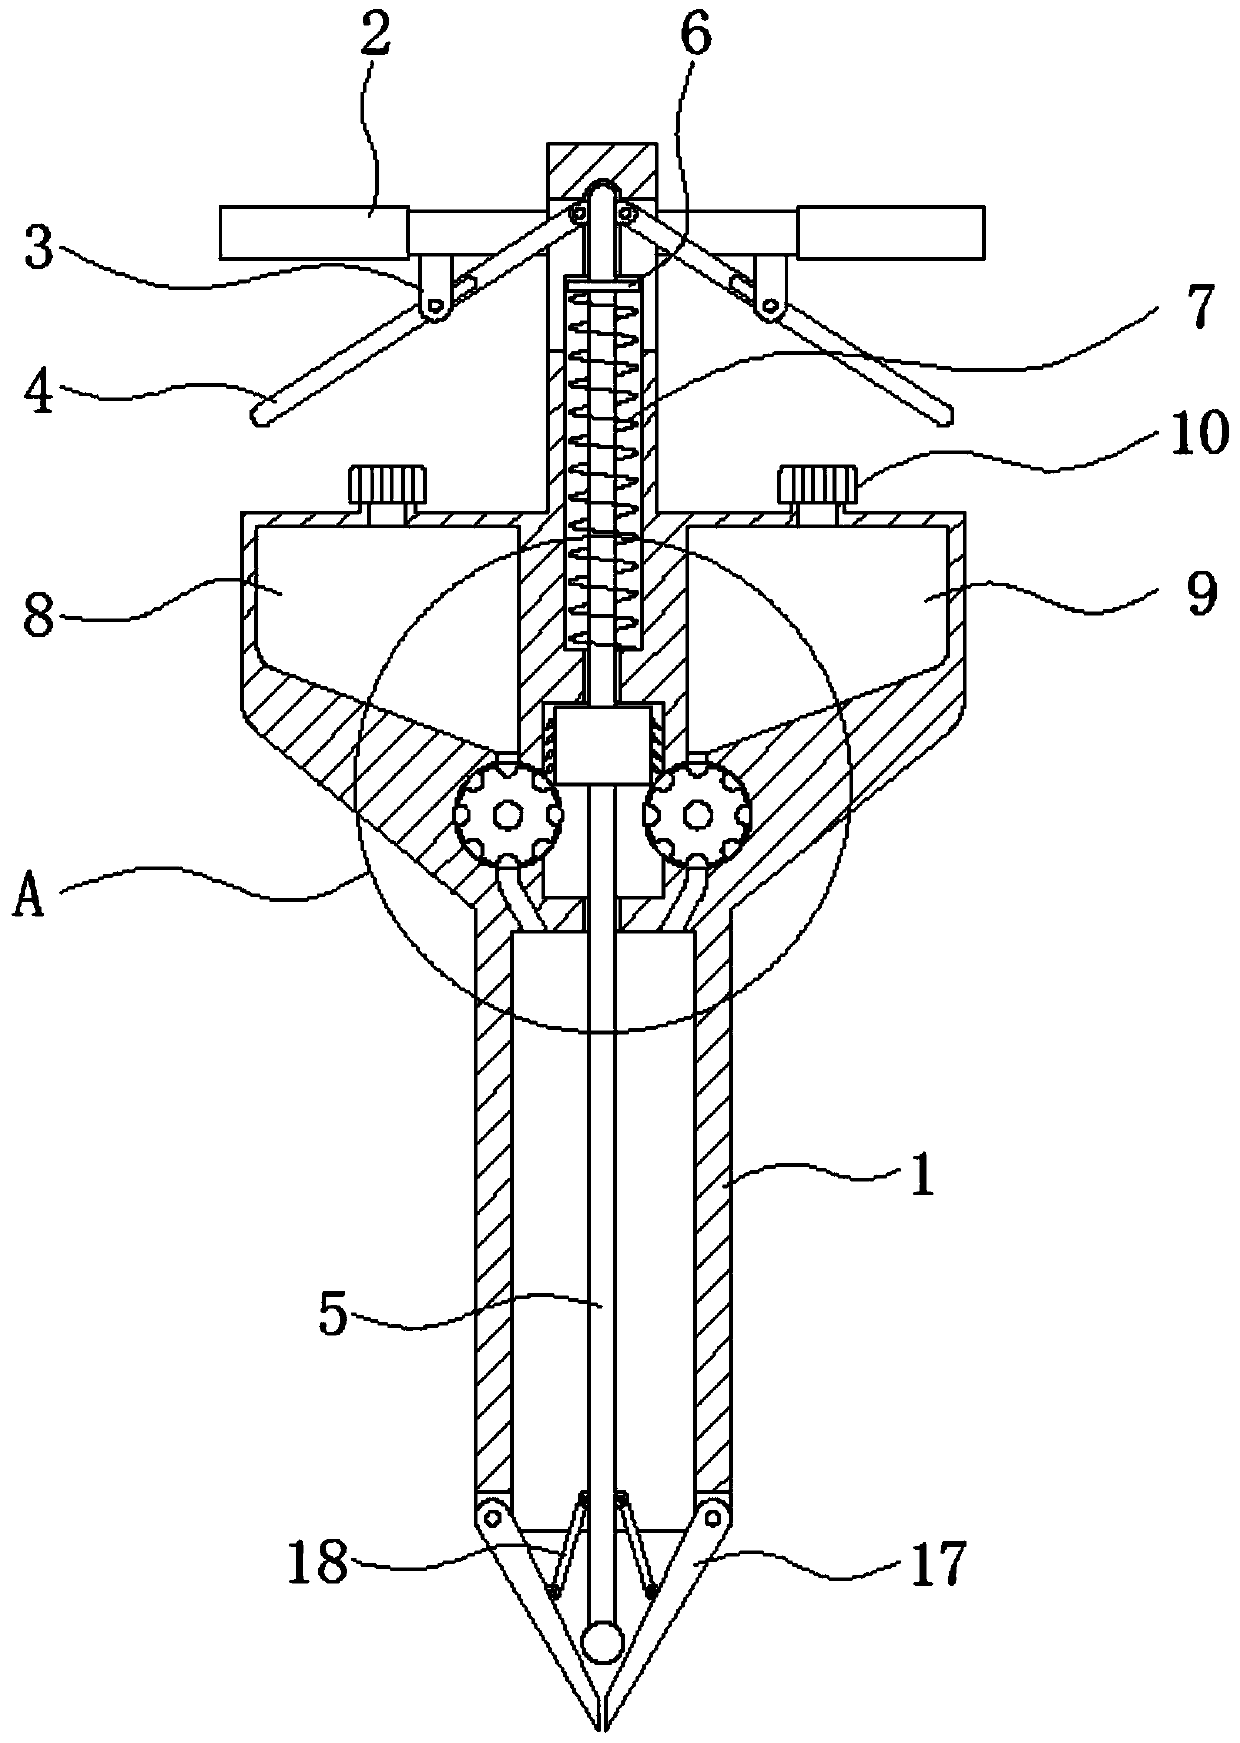 Agricultural seed crop cultivation device based on rotating disk measuring